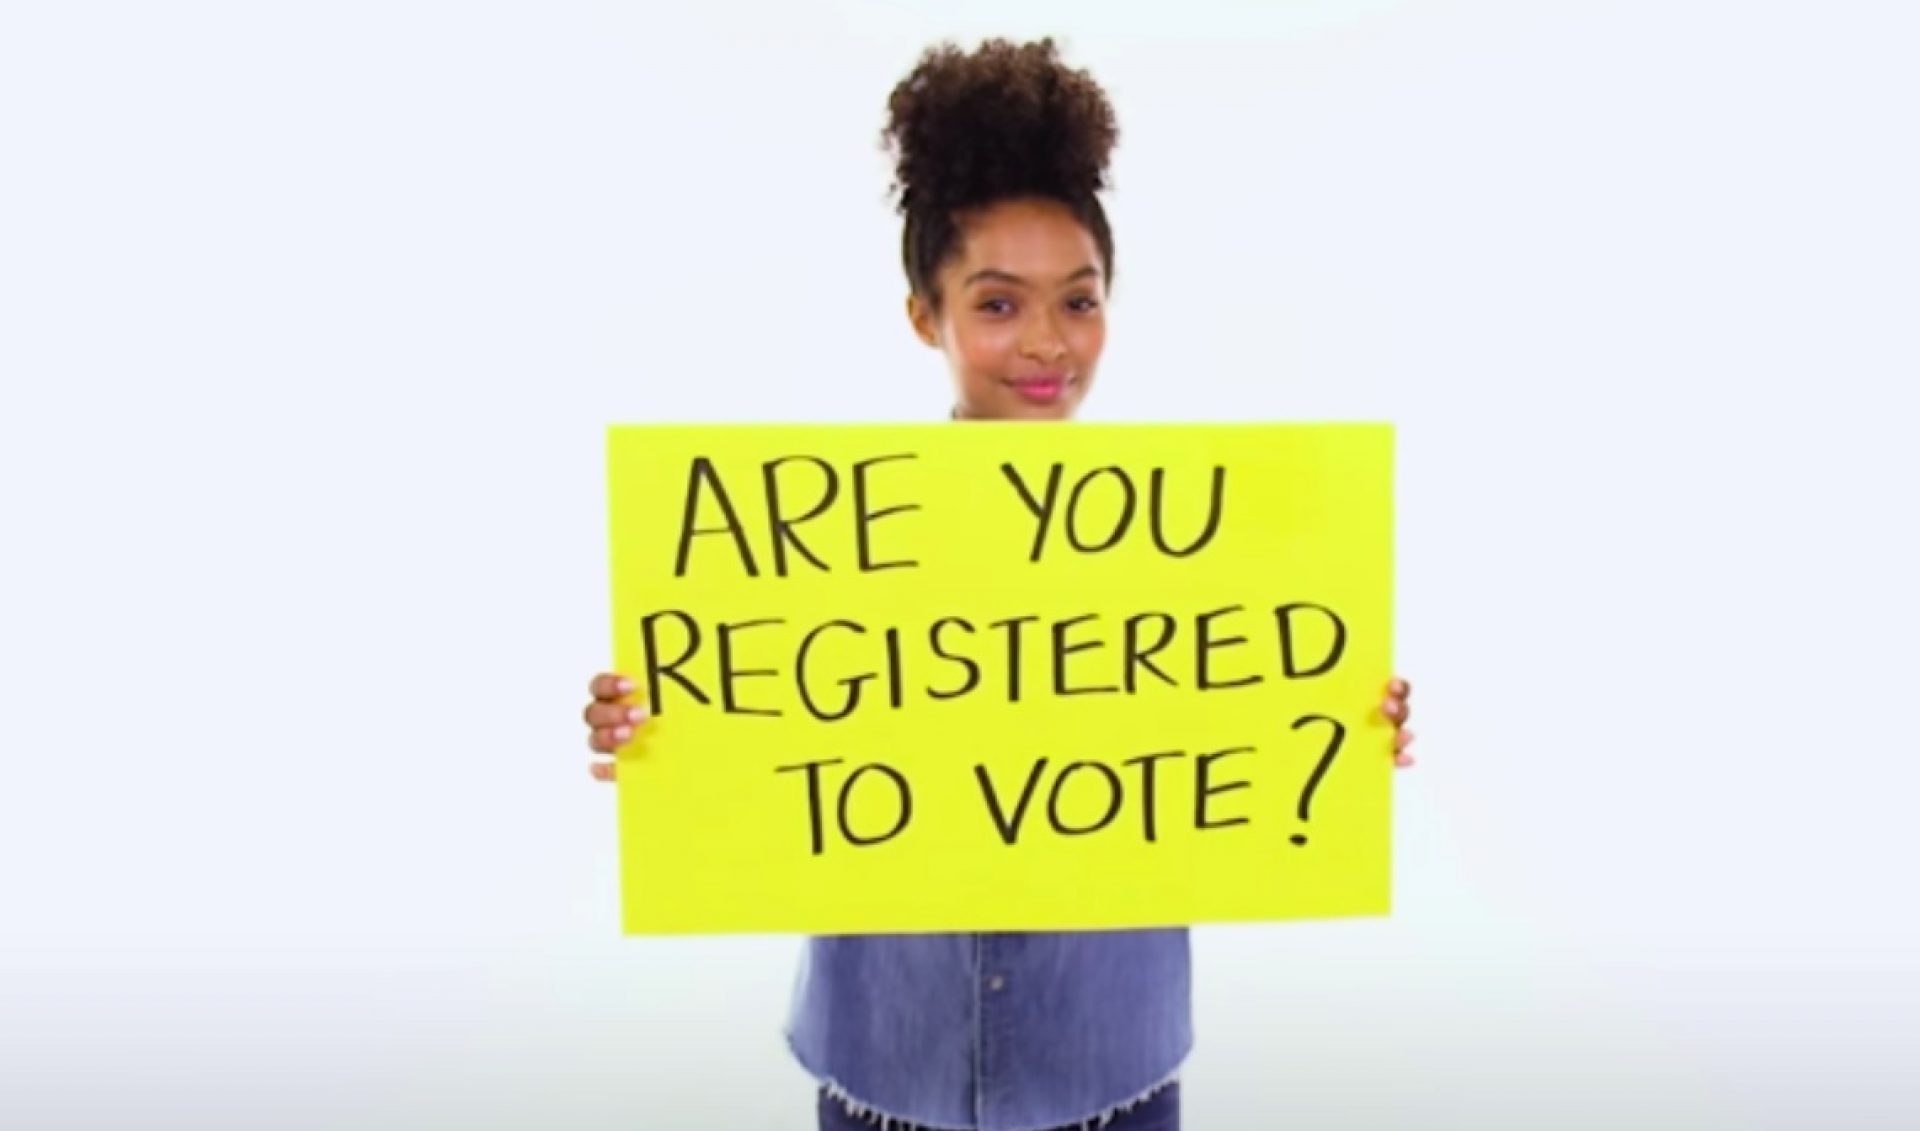 Once A Month, ‘Black-ish’ Star Yara Shahidi Will Take Over NowThis’ Social Network To Register Voters